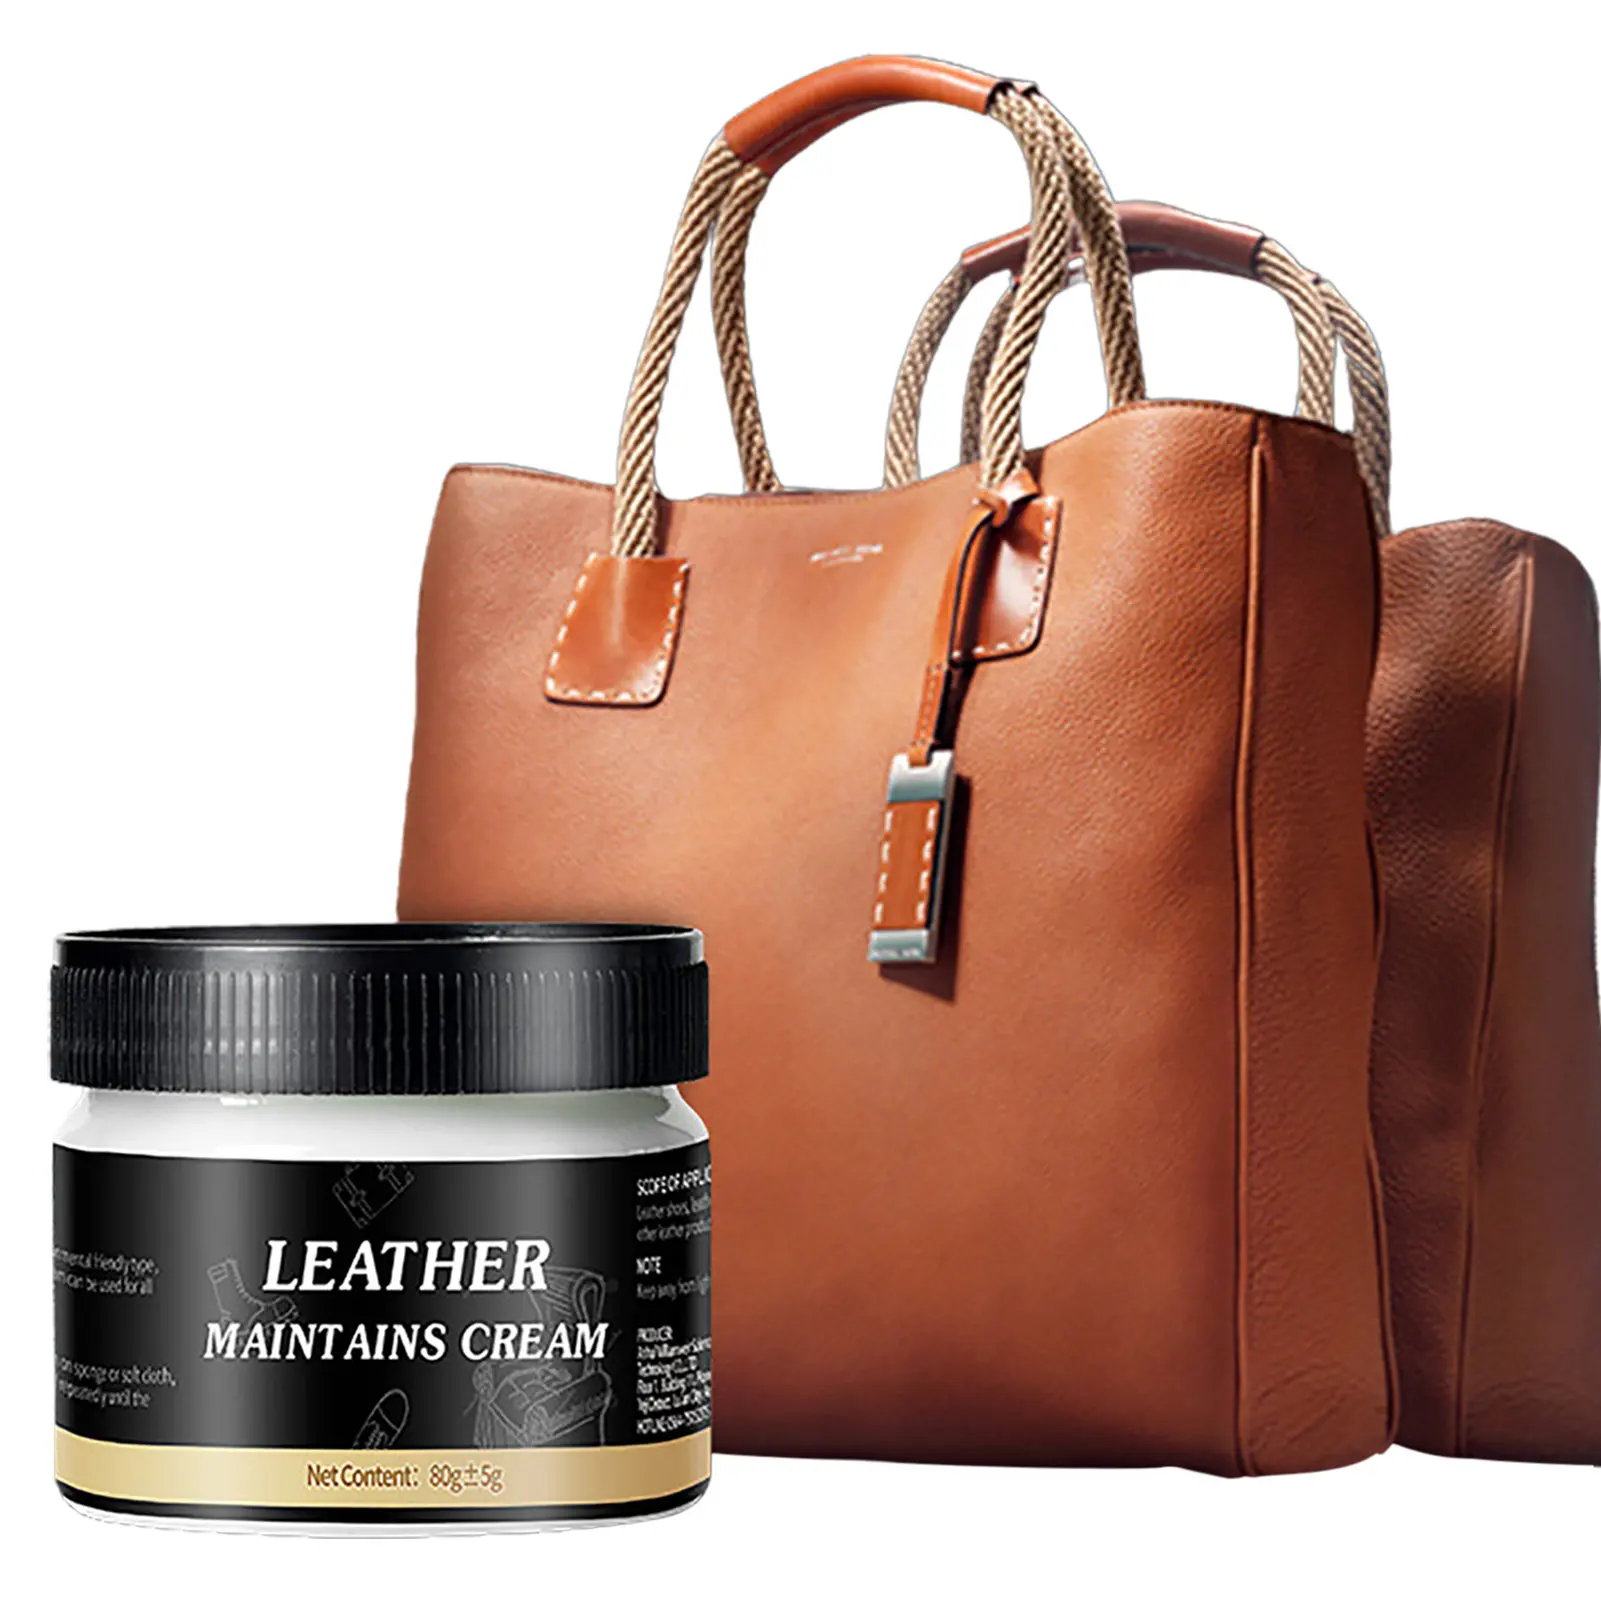 

Leather Cleaner Leather Restorer Cream Scratch Repair Leather Dye Leather Repair Kits For Furniture Shoes Car Seats Advanced Vin